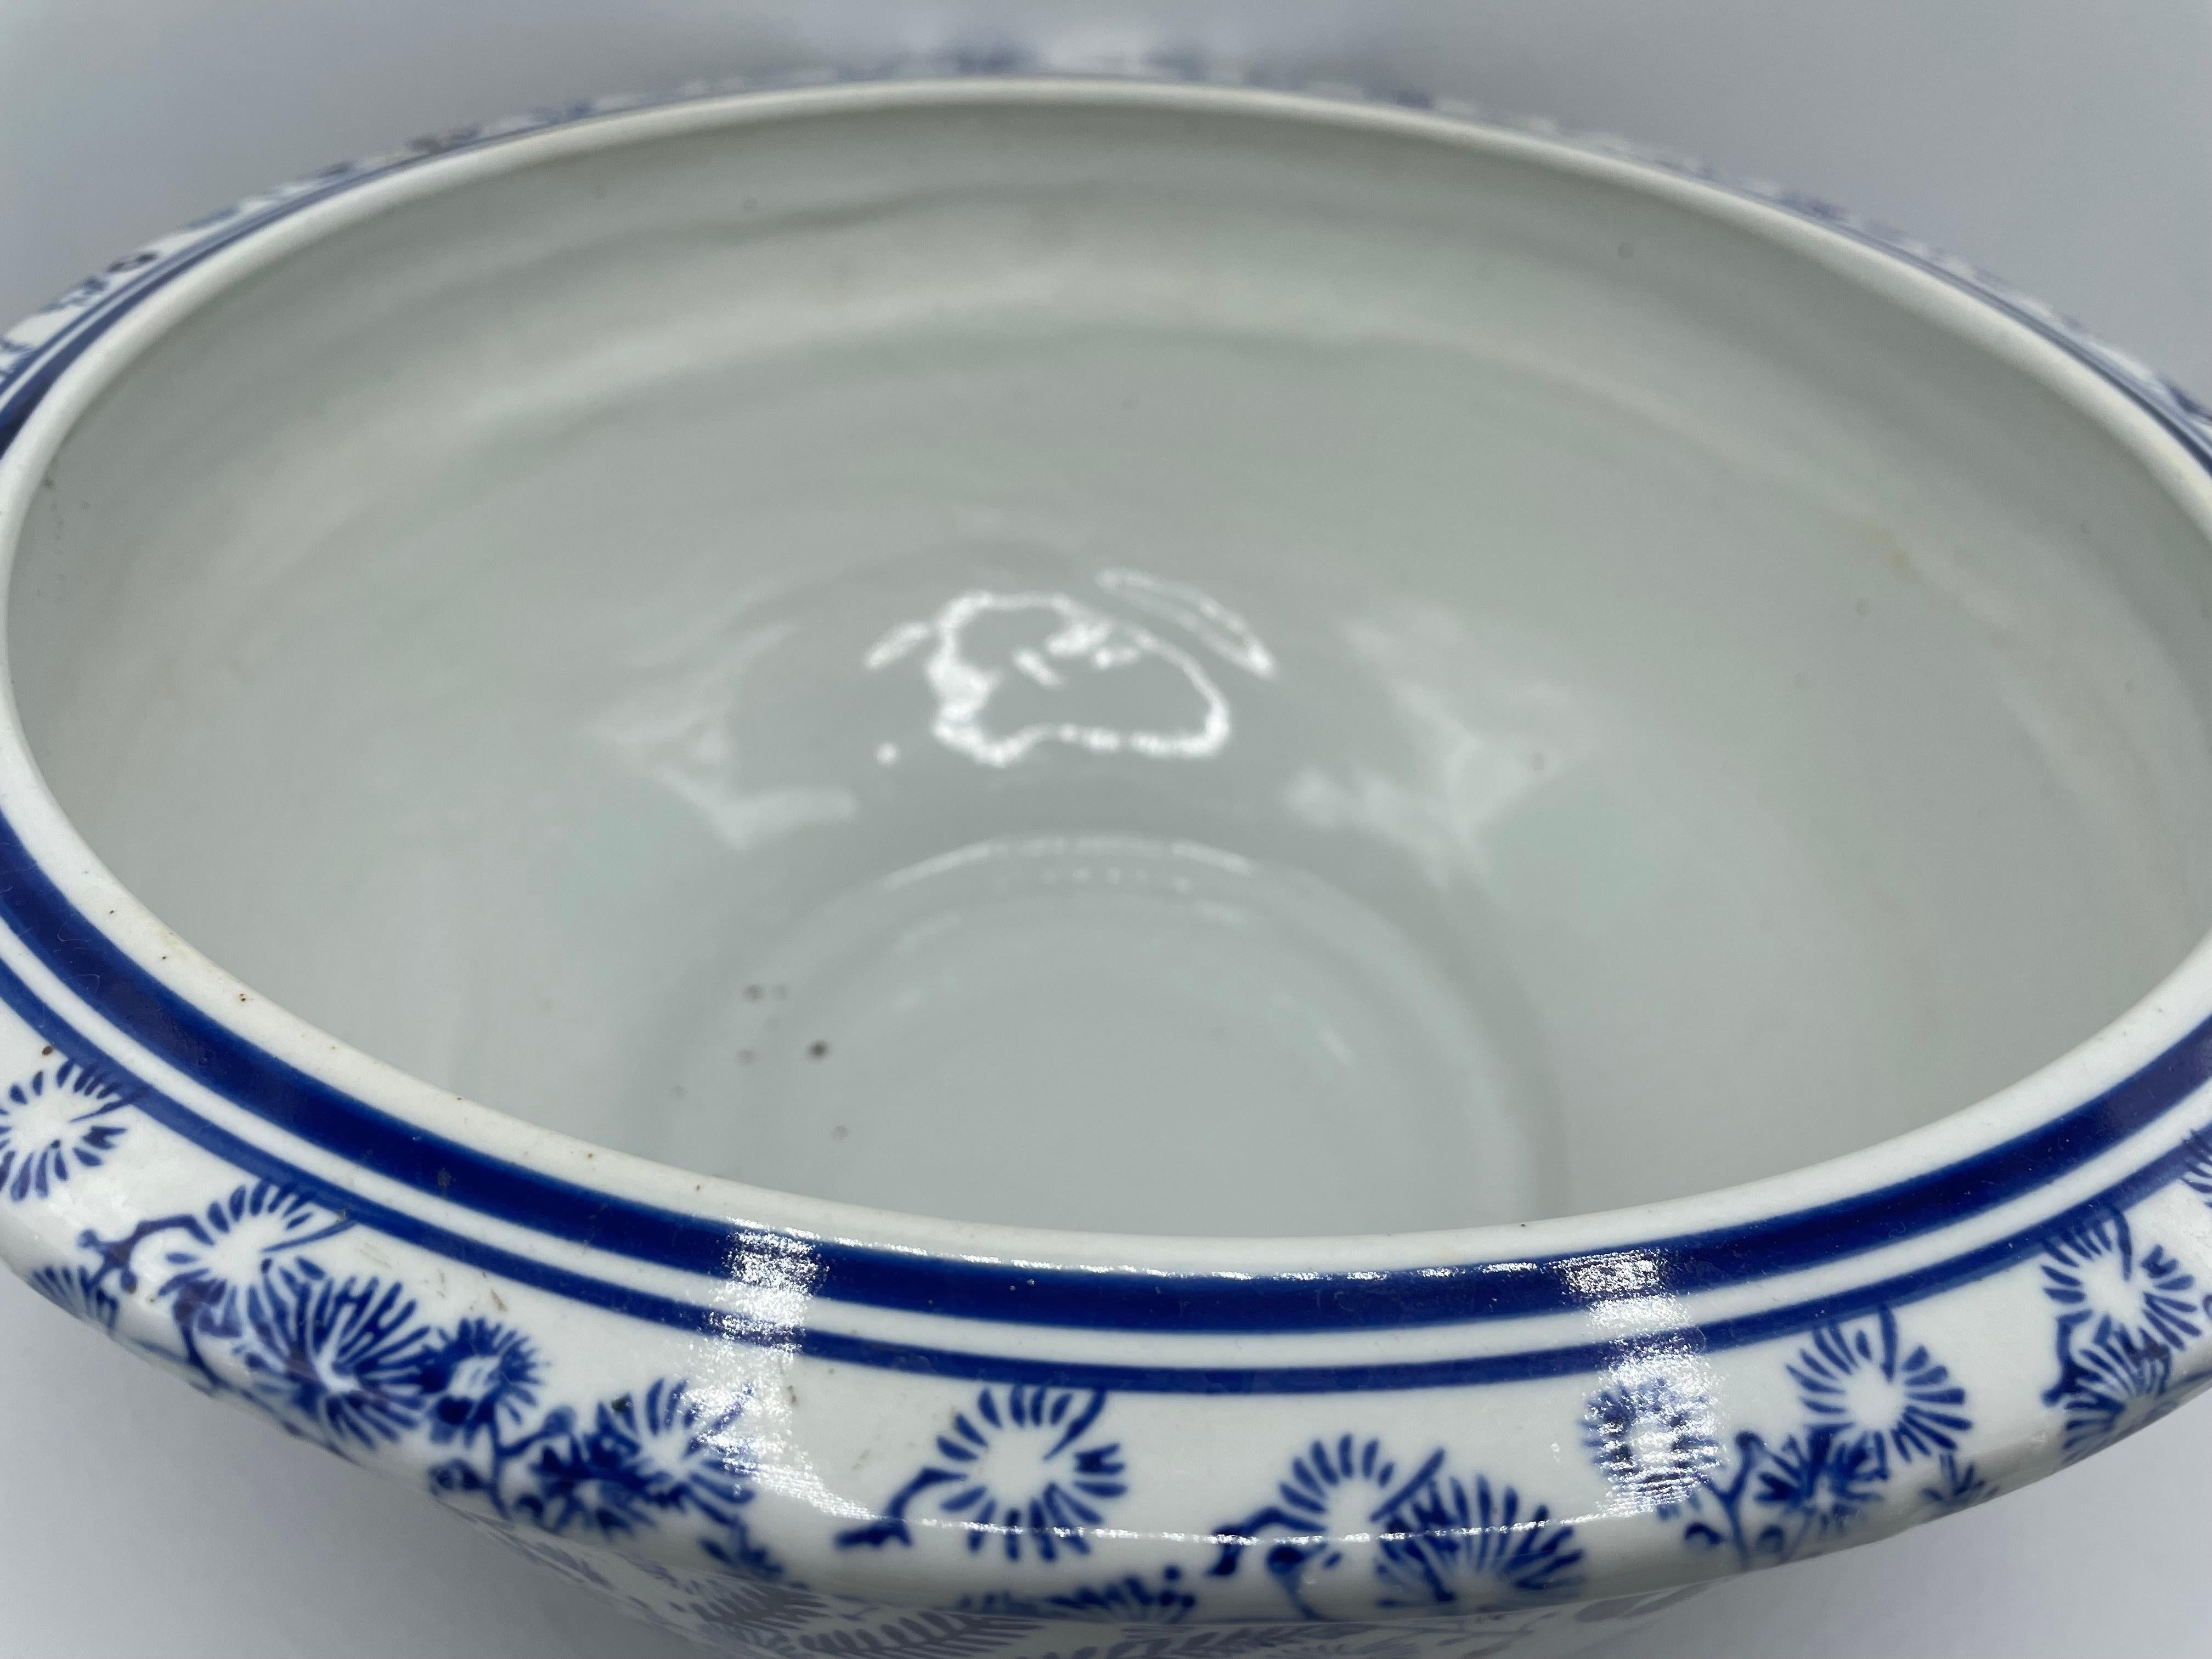 Japanese porcelain bowl which was made around 1980s in Showa era.
This bowl can be used as a decoration, bowl for some goldfish and flower pot.
On the surface, there are paintings of goldfish and leaves. 
It's all hand painted. 

Dimensions:
33 x 33